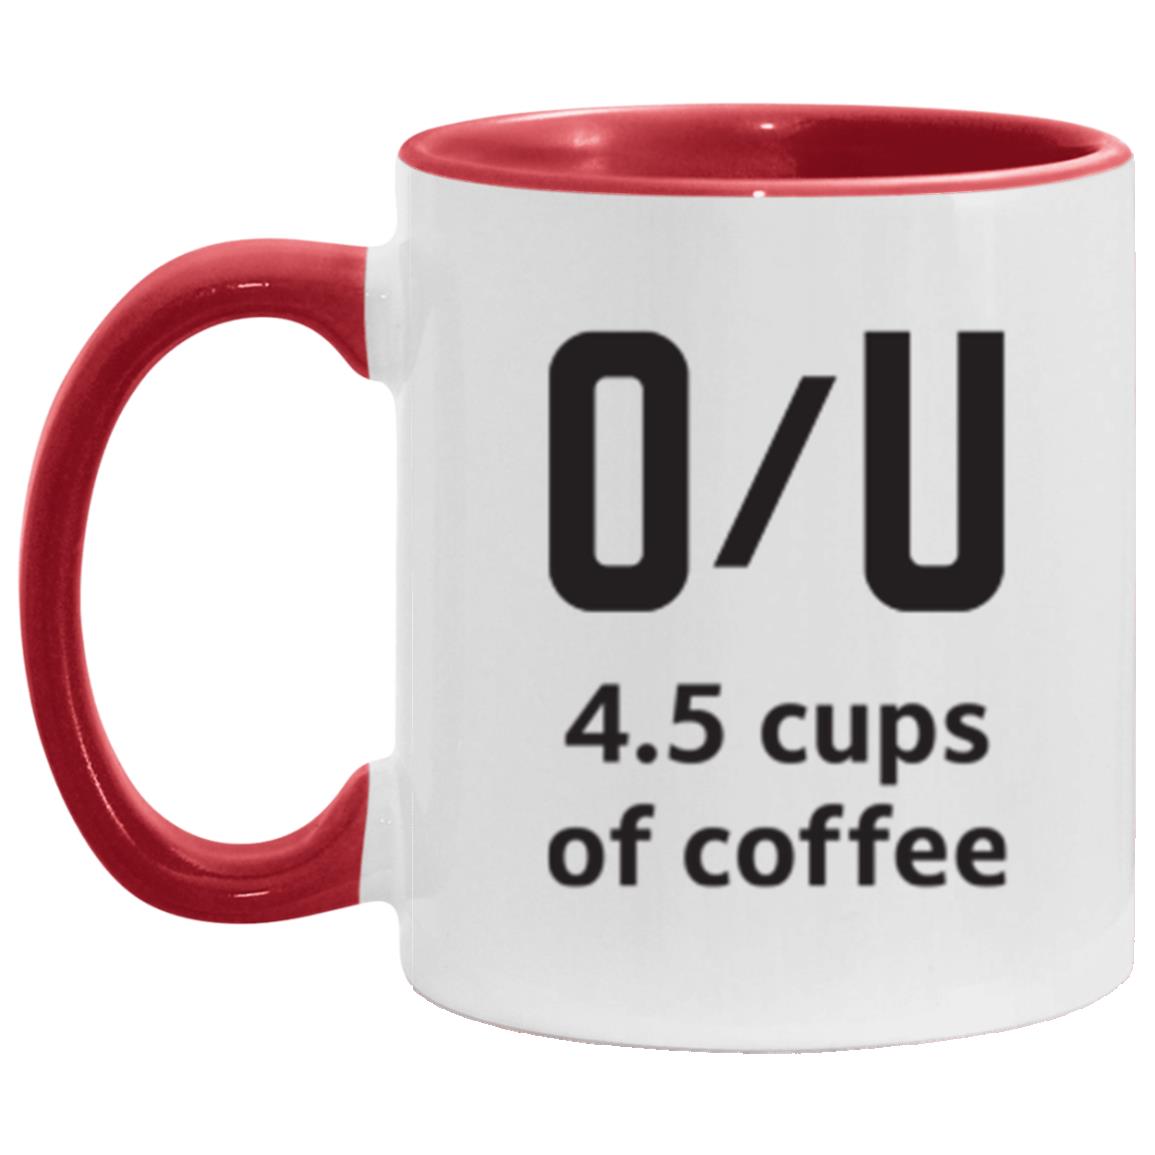 Over / Under 4.5 cups of coffee - 11 oz. Accent Mug